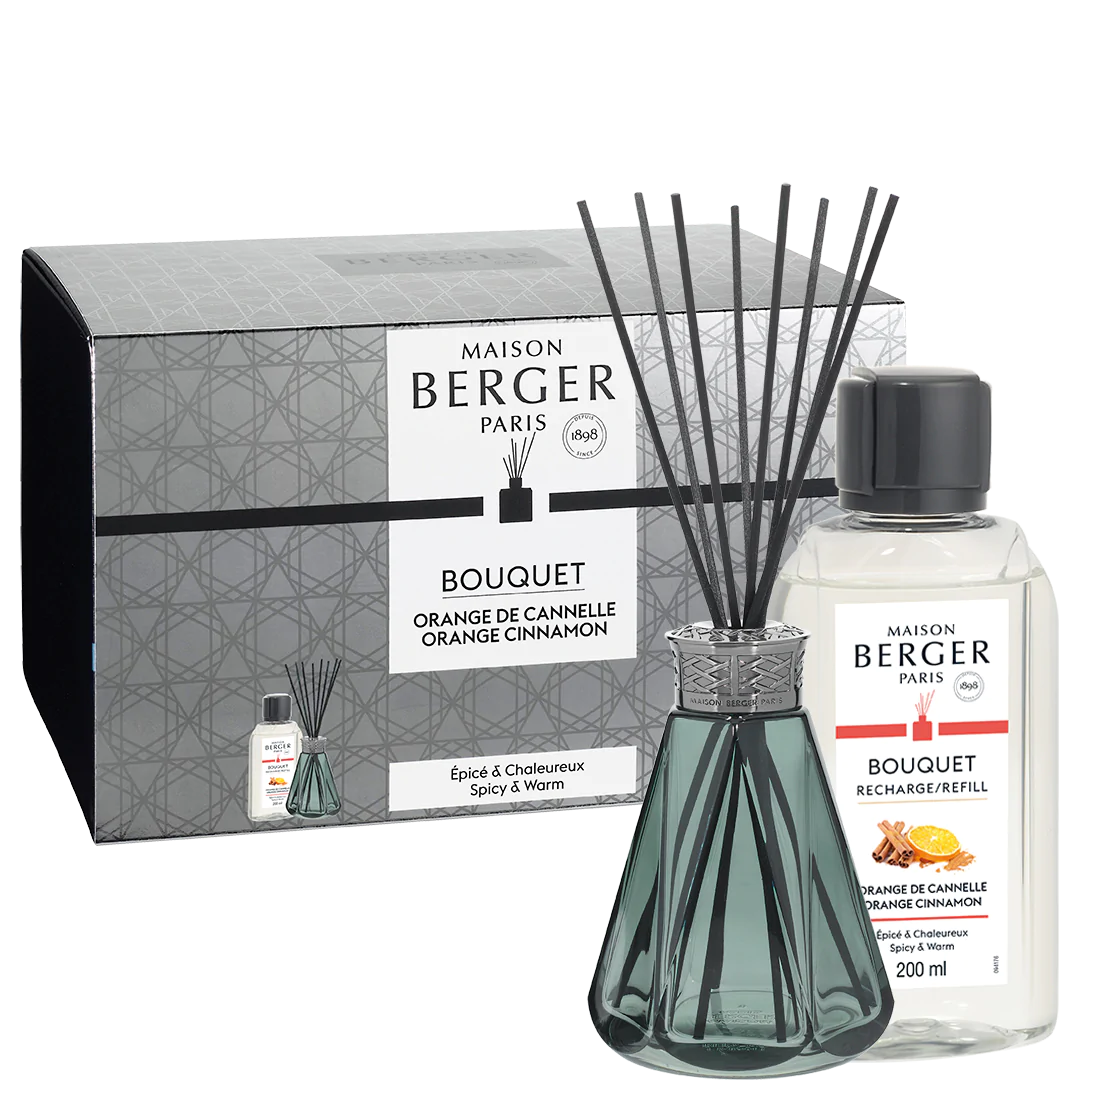 Pyramide Green with Orange Cinnamon Reed Diffuser by Maison Berger - SALE